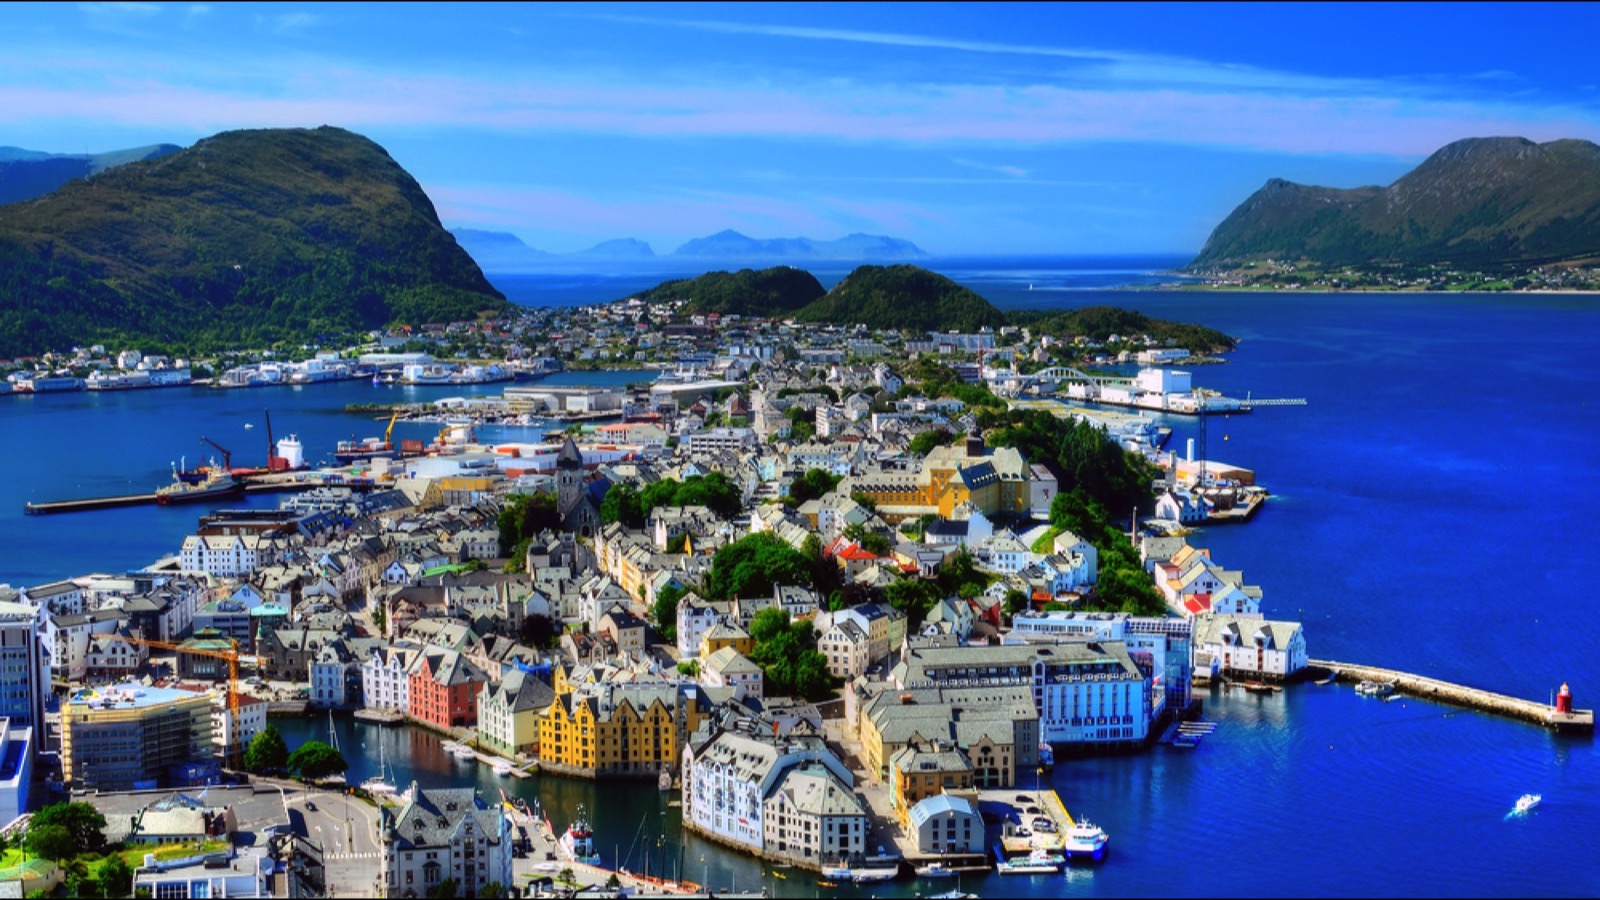 <p>Rich with Viking legends and history, Norway thrives with culture, tradition, history, and nature, featuring the highest concentration of fjords in the world and the miraculous Northern Lights. It is one of the most-visited countries in the world, voted as the happiest place on Earth, full of welcoming locals, and low crime rates.</p>